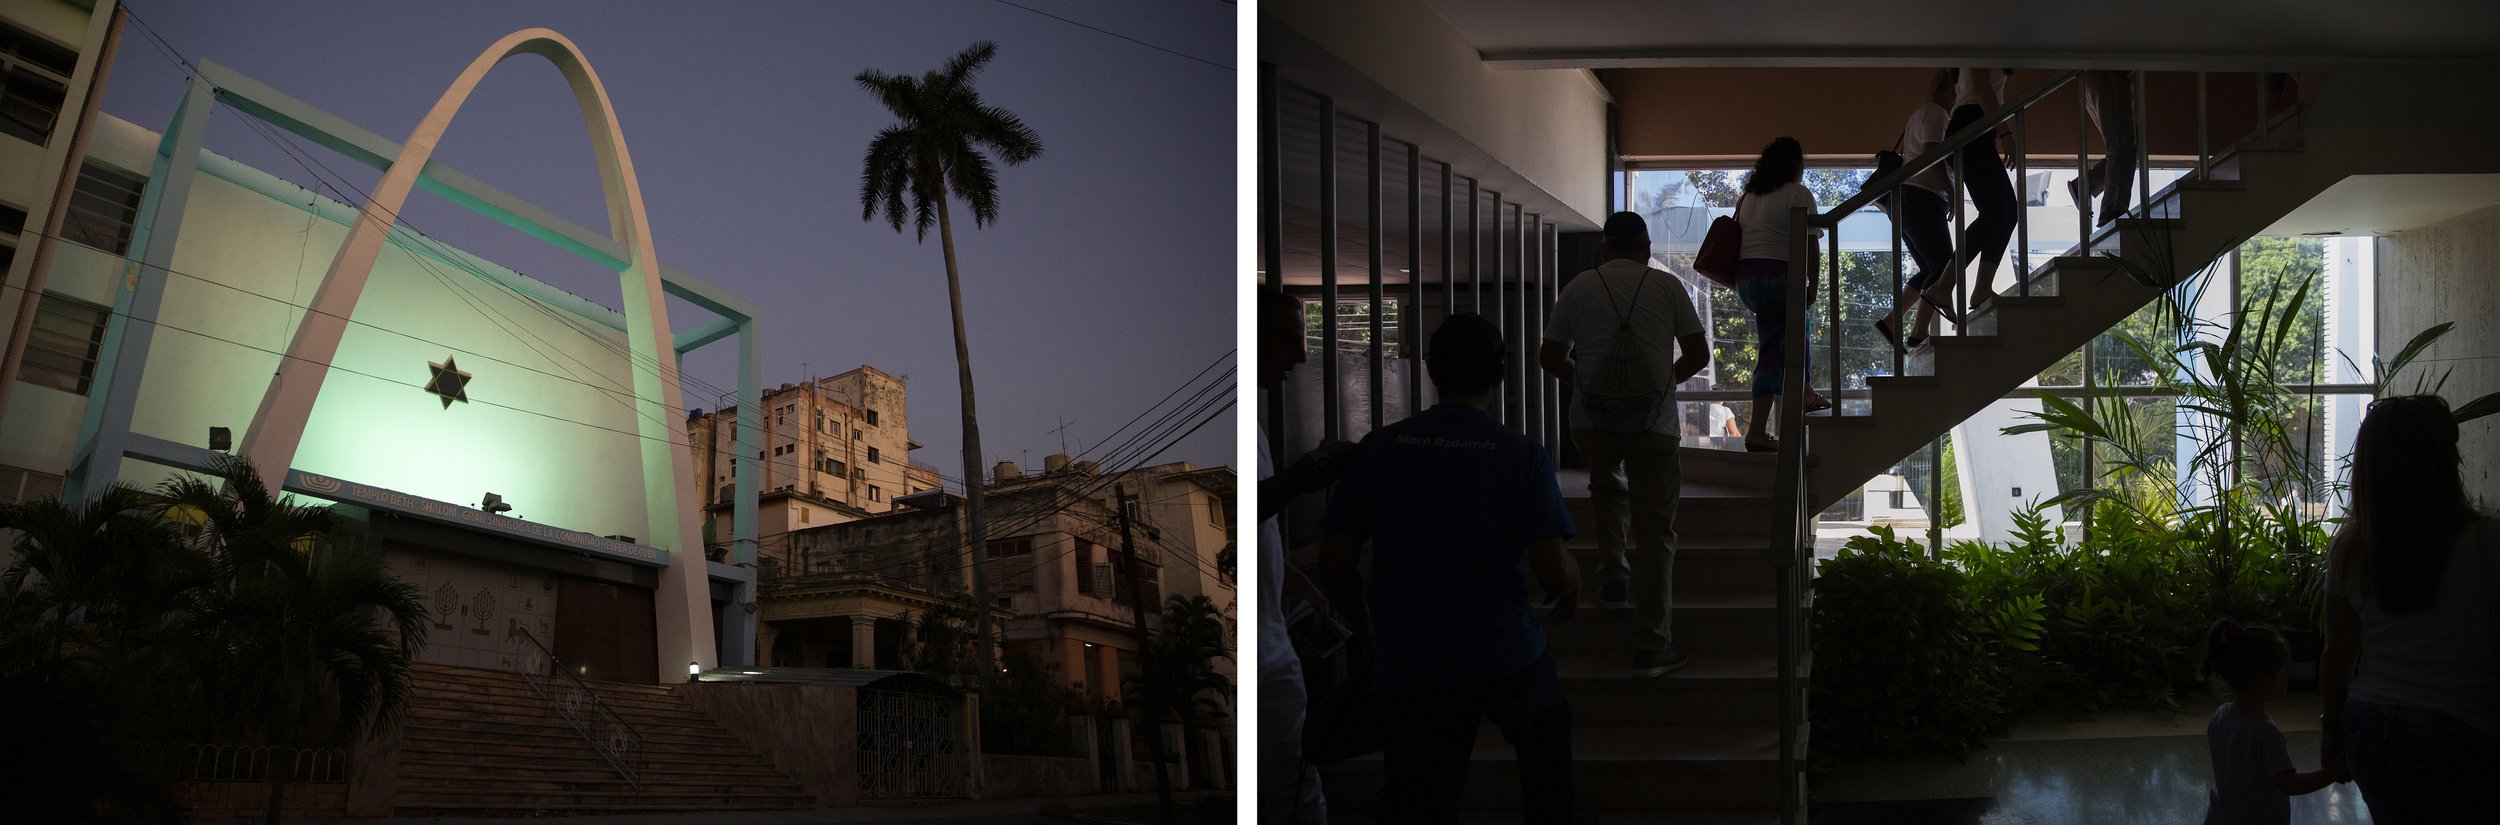  (LEFT) Beth Shalom Synagogue was built in 1952 and is one of three synagogues in Havana, and only five in all of Cuba. (RIGHT) Members of the Beth Shalom congregation attend Sunday school on the morning of January 19, 2020. Adri’s father, Isac, is o